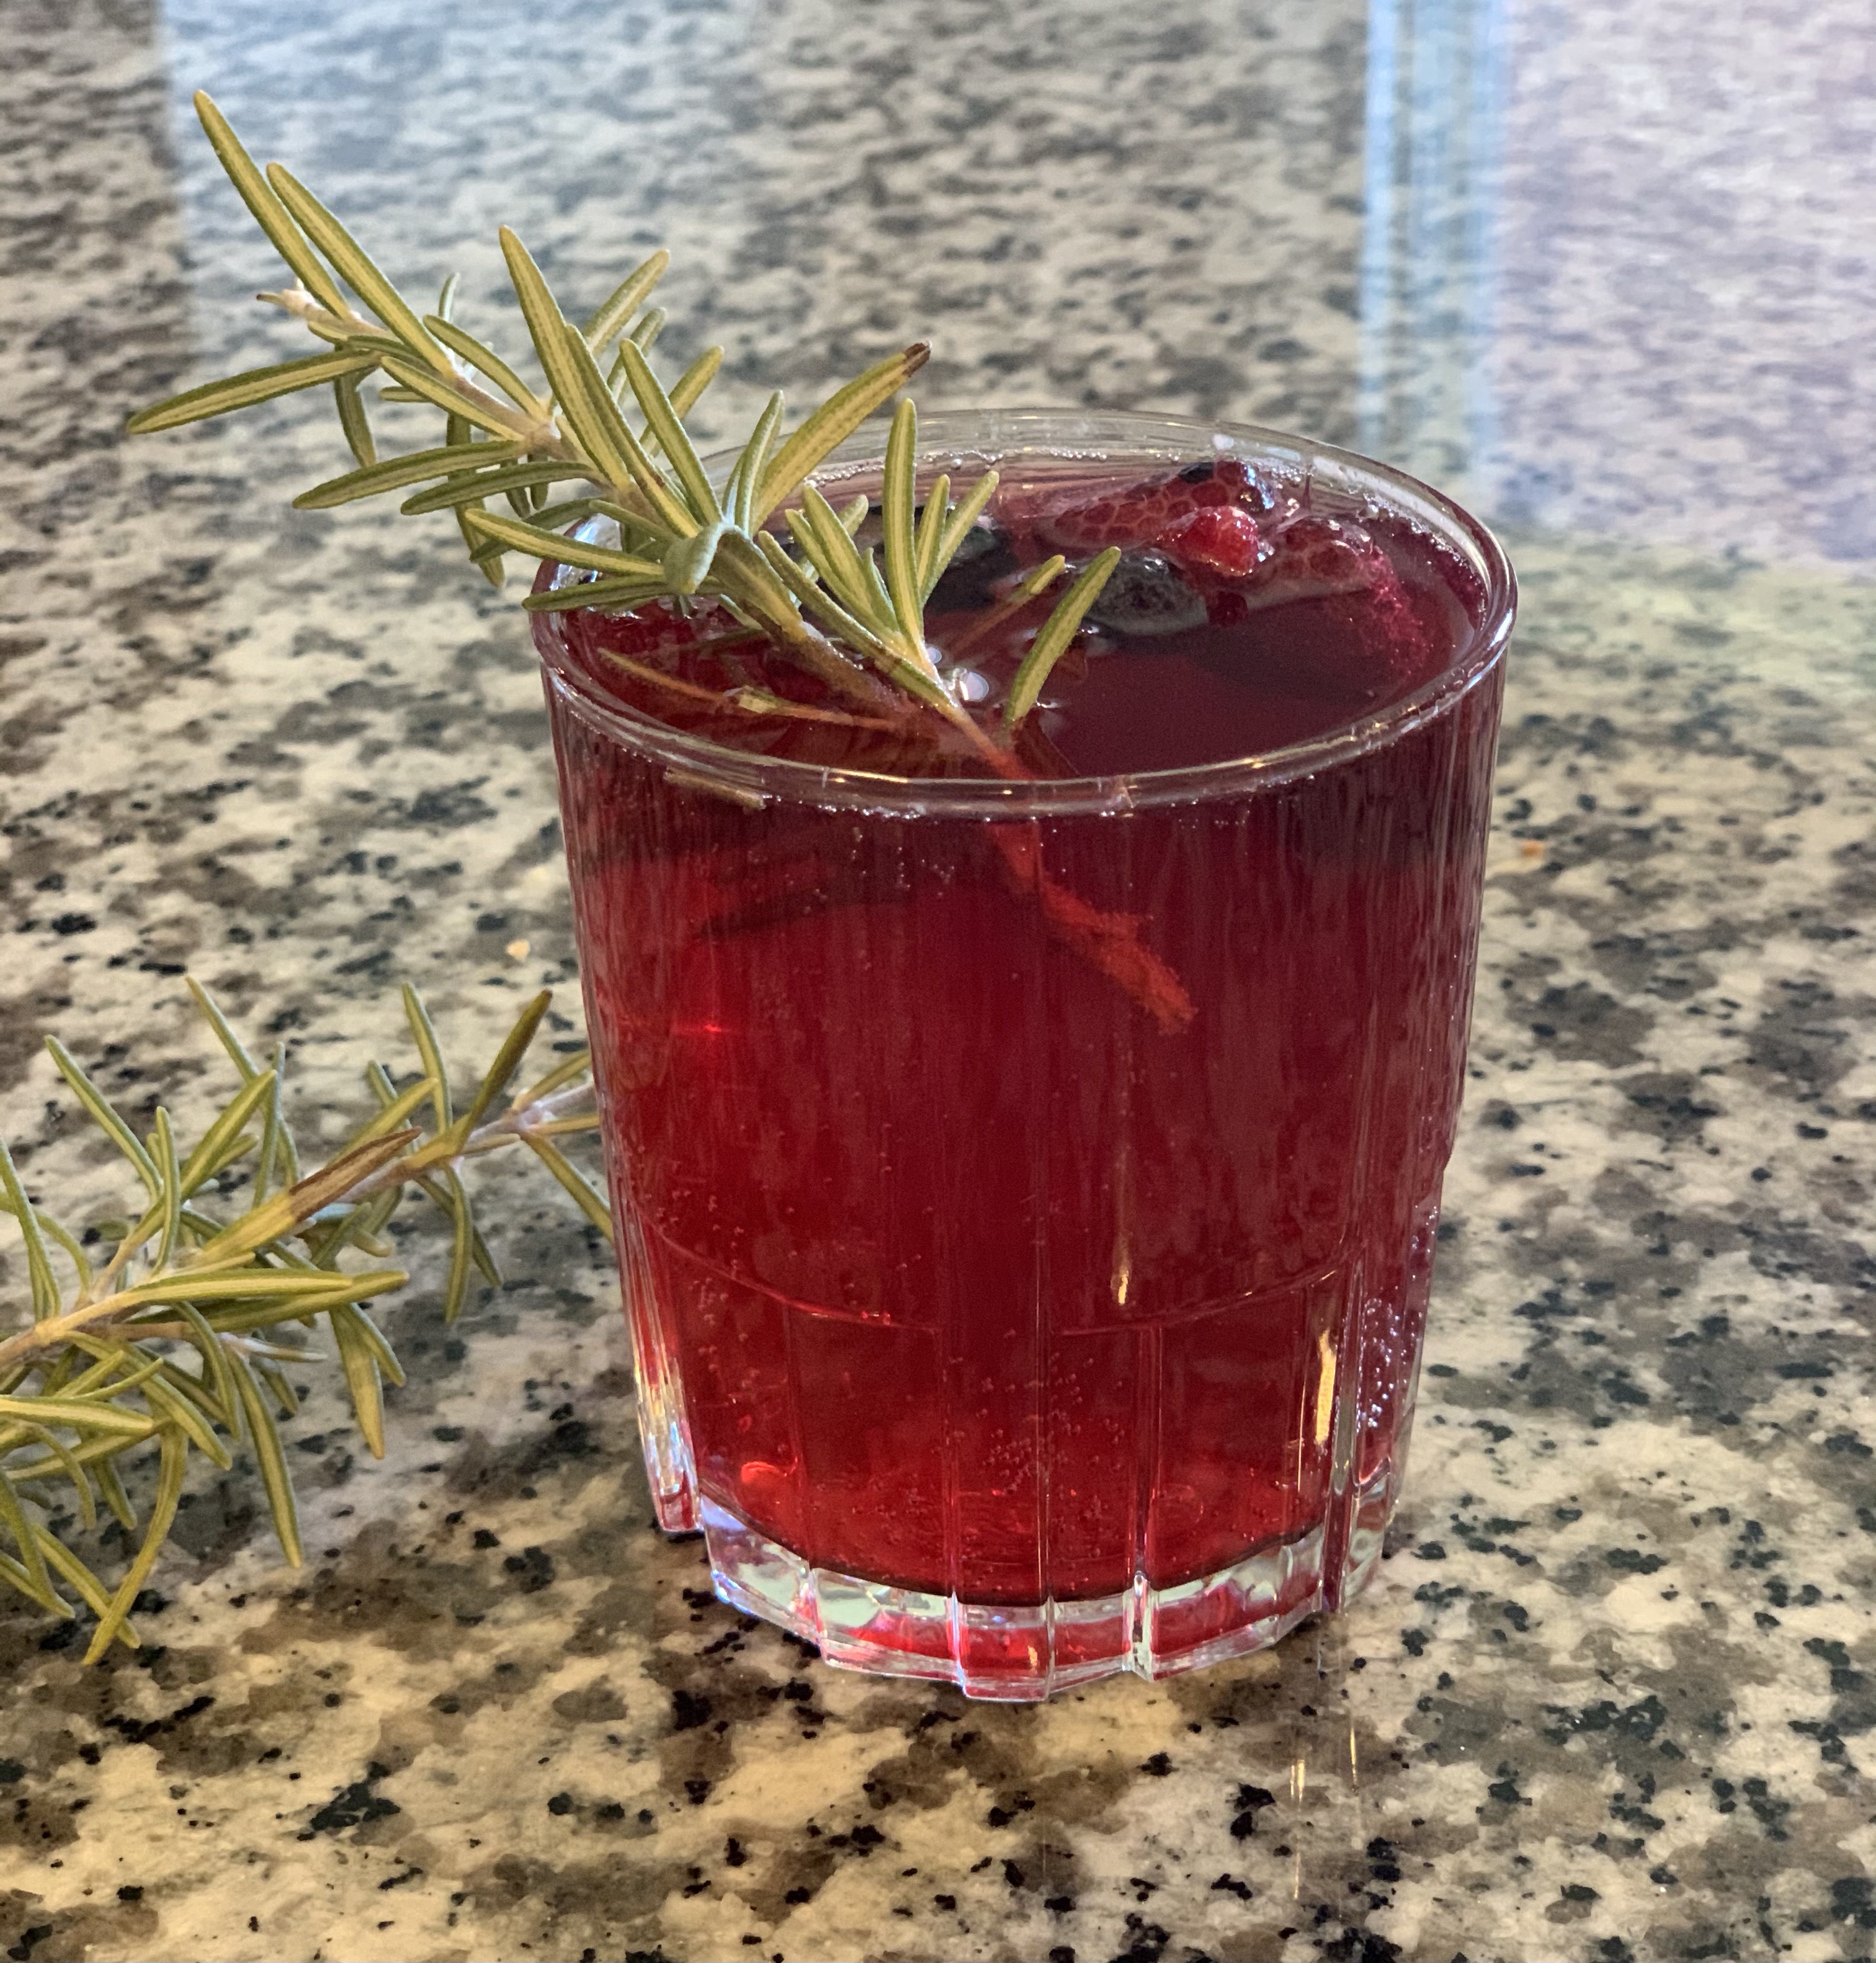 To make the Berry & Rosemary Fizz  add 2-ounces of cooled infused syrup and 1-ounce of club soda to a shaker filled with ice. Shake to chill. Strain into a Duralex Jazz Tumbler and fill glass with Prosecco. Garnish with a few berries and a sprig of rosemary.